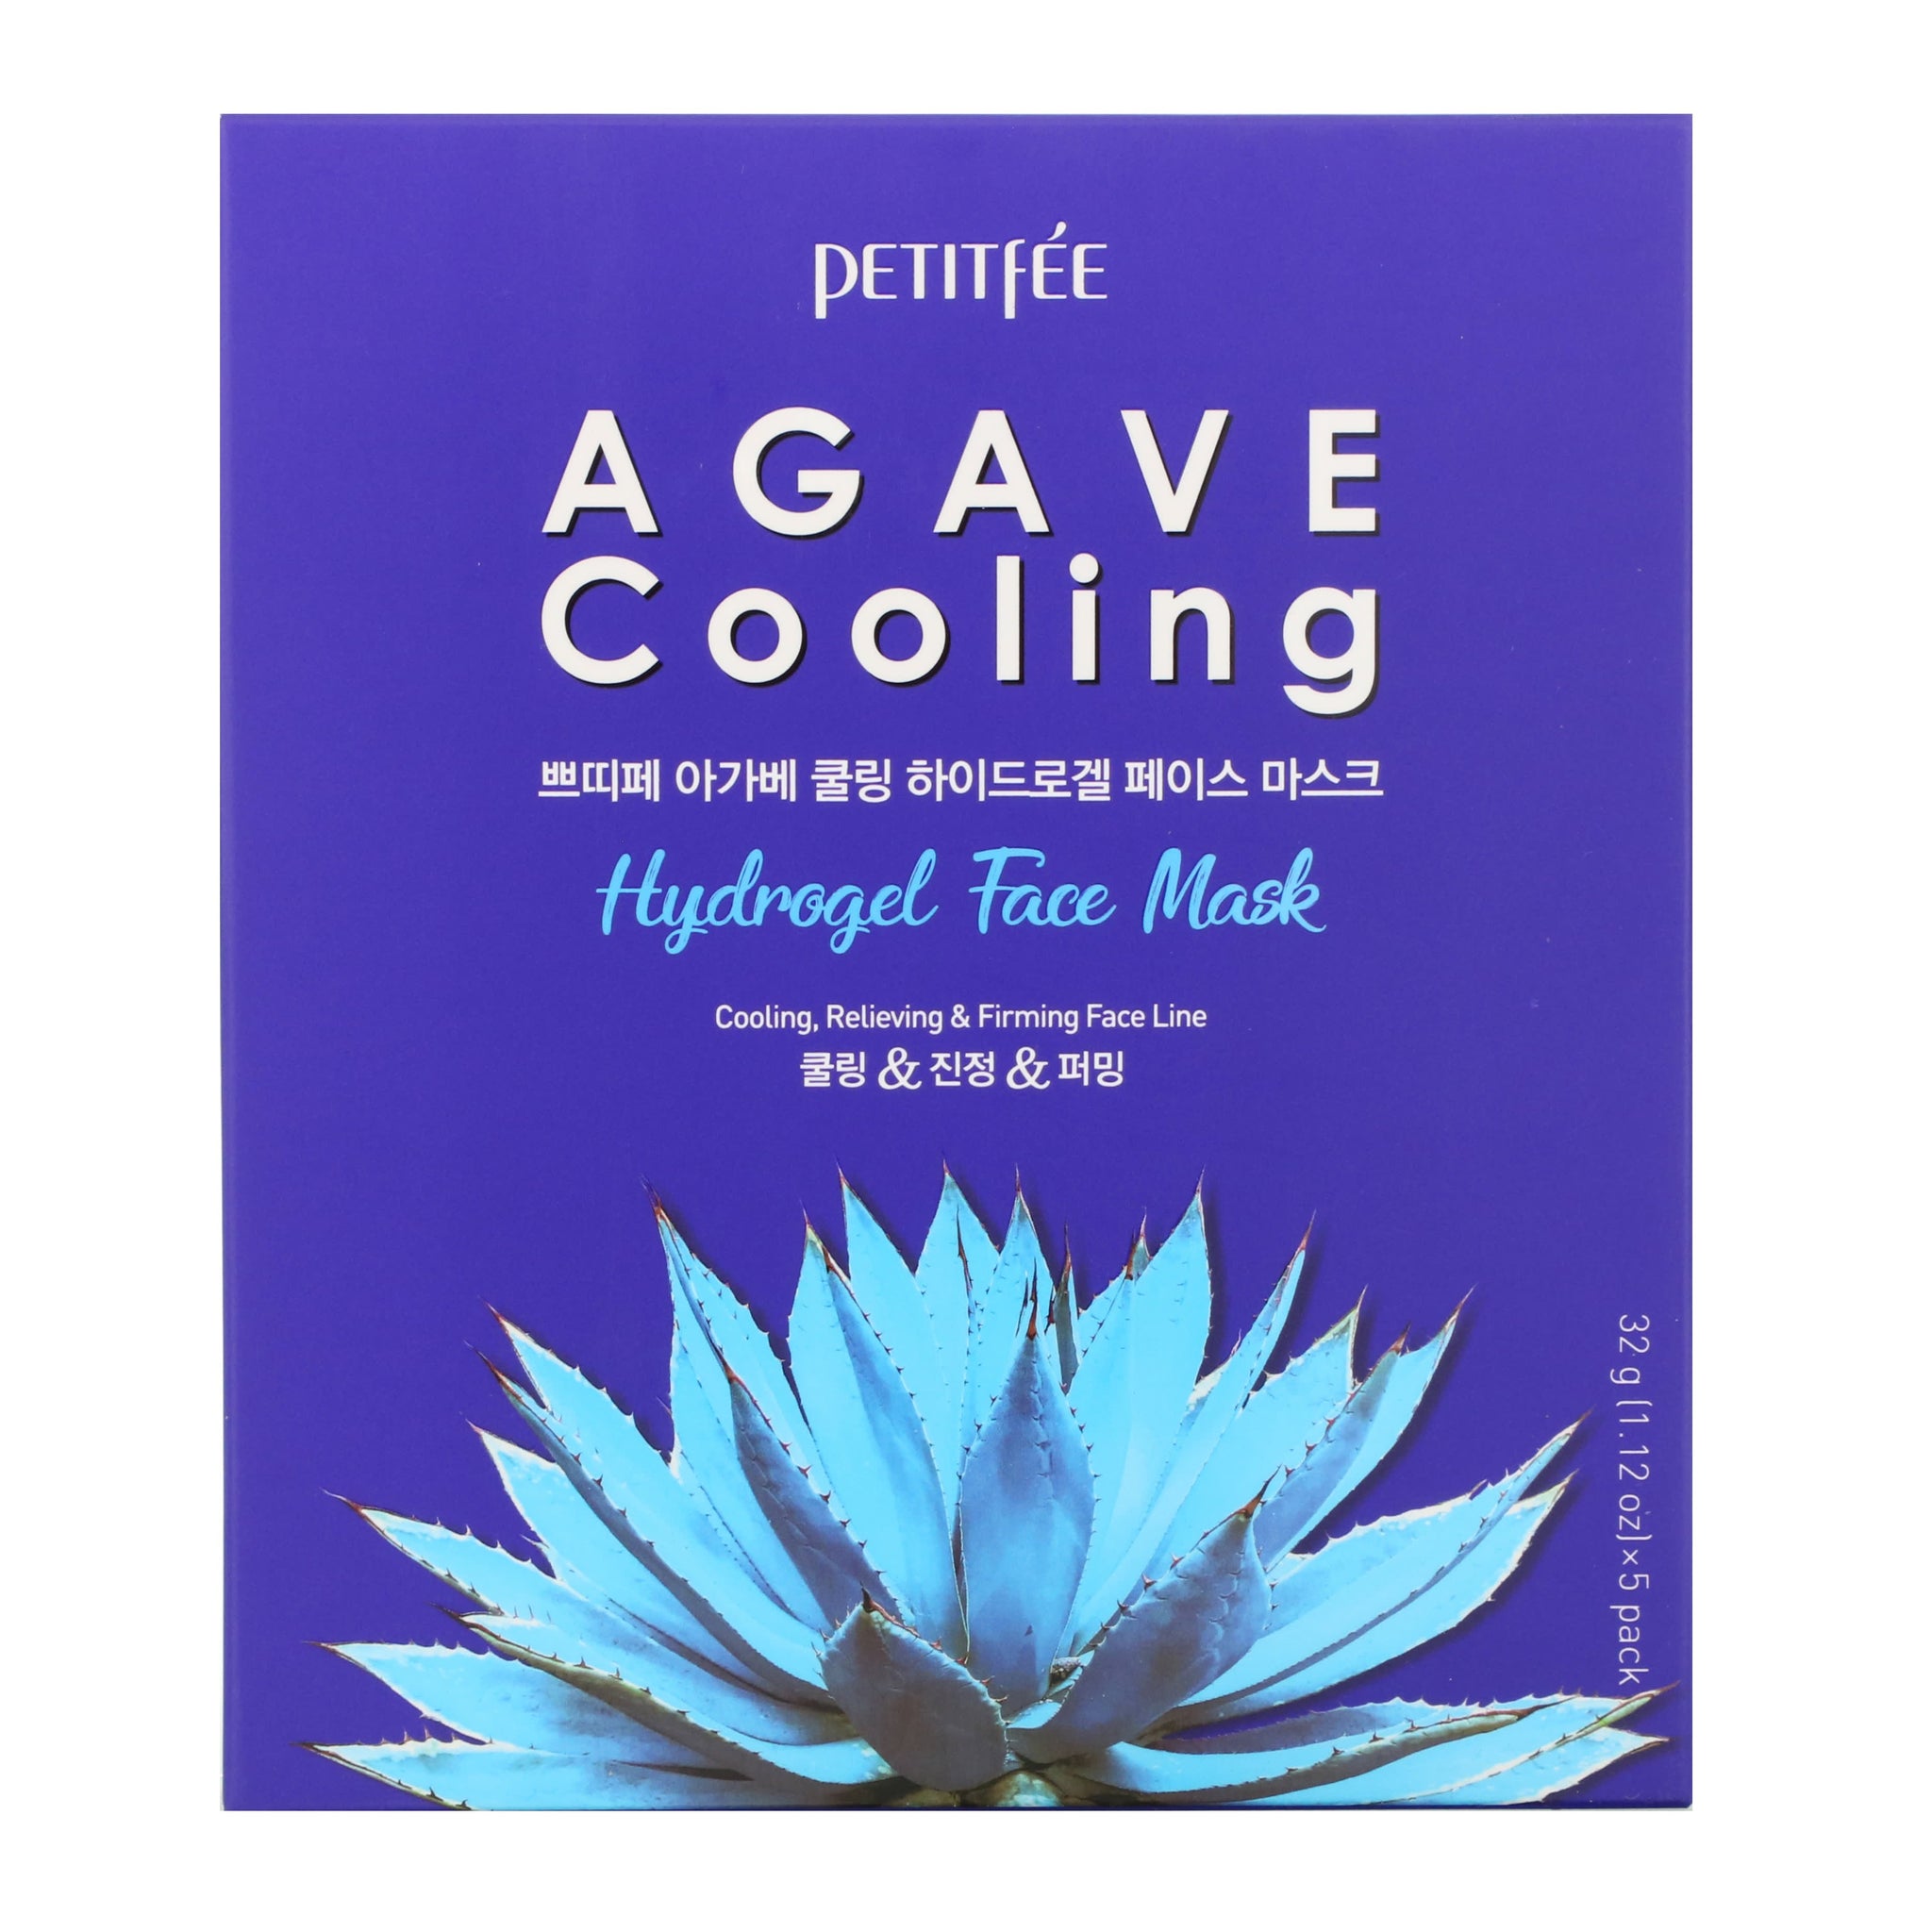 Petitfee, Agave Cooling, Hydrogel Beauty Face Mask, 1.12 oz (32 g) Each